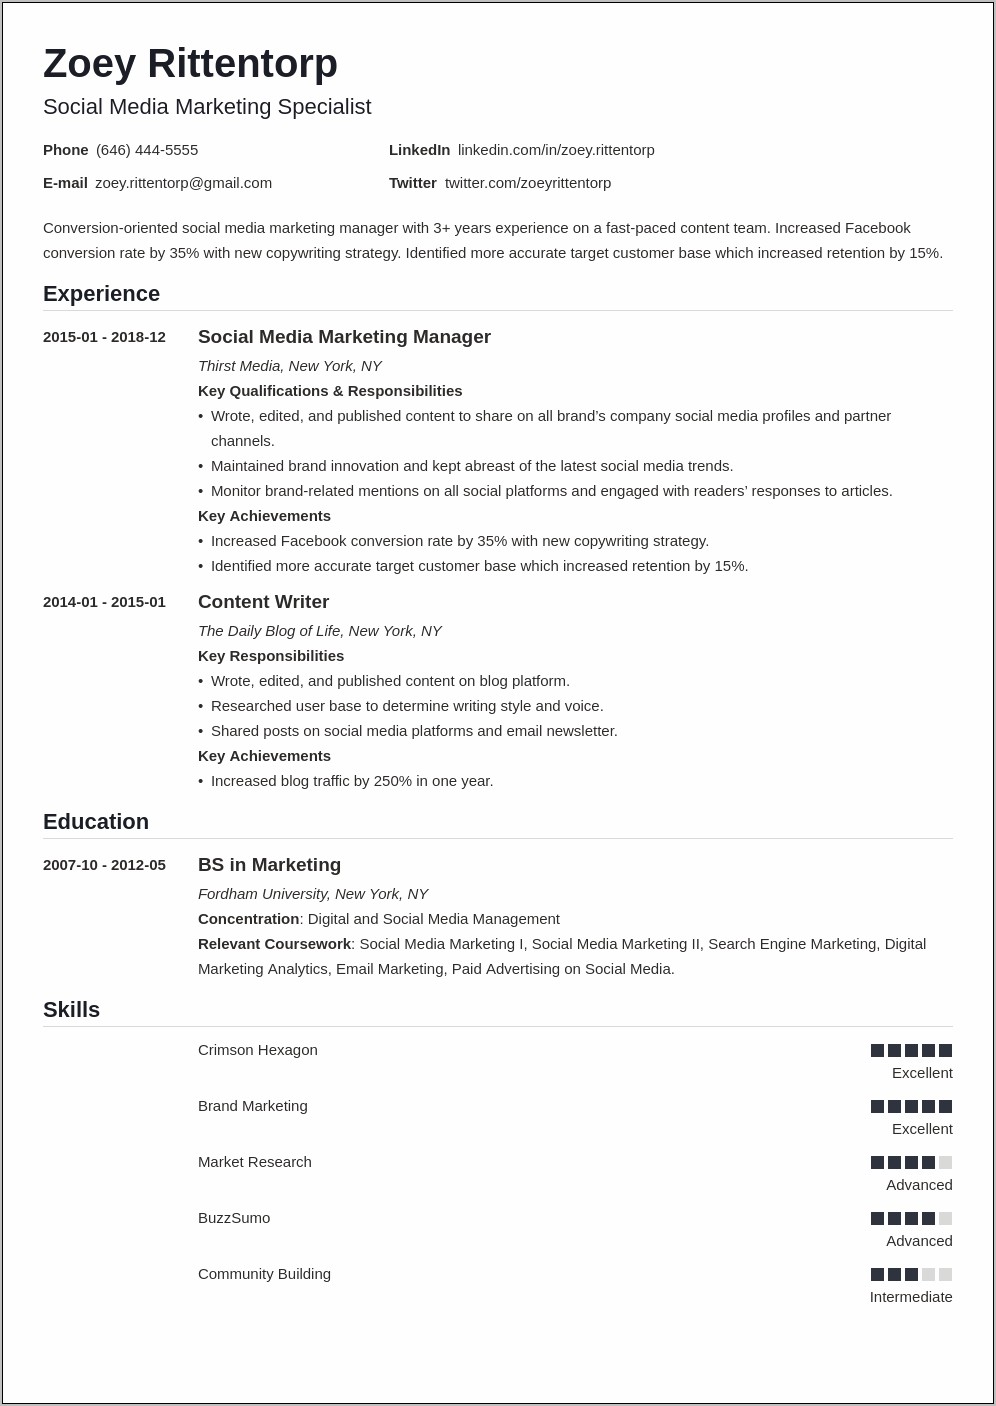 Resume With Statistics Social Media Manager